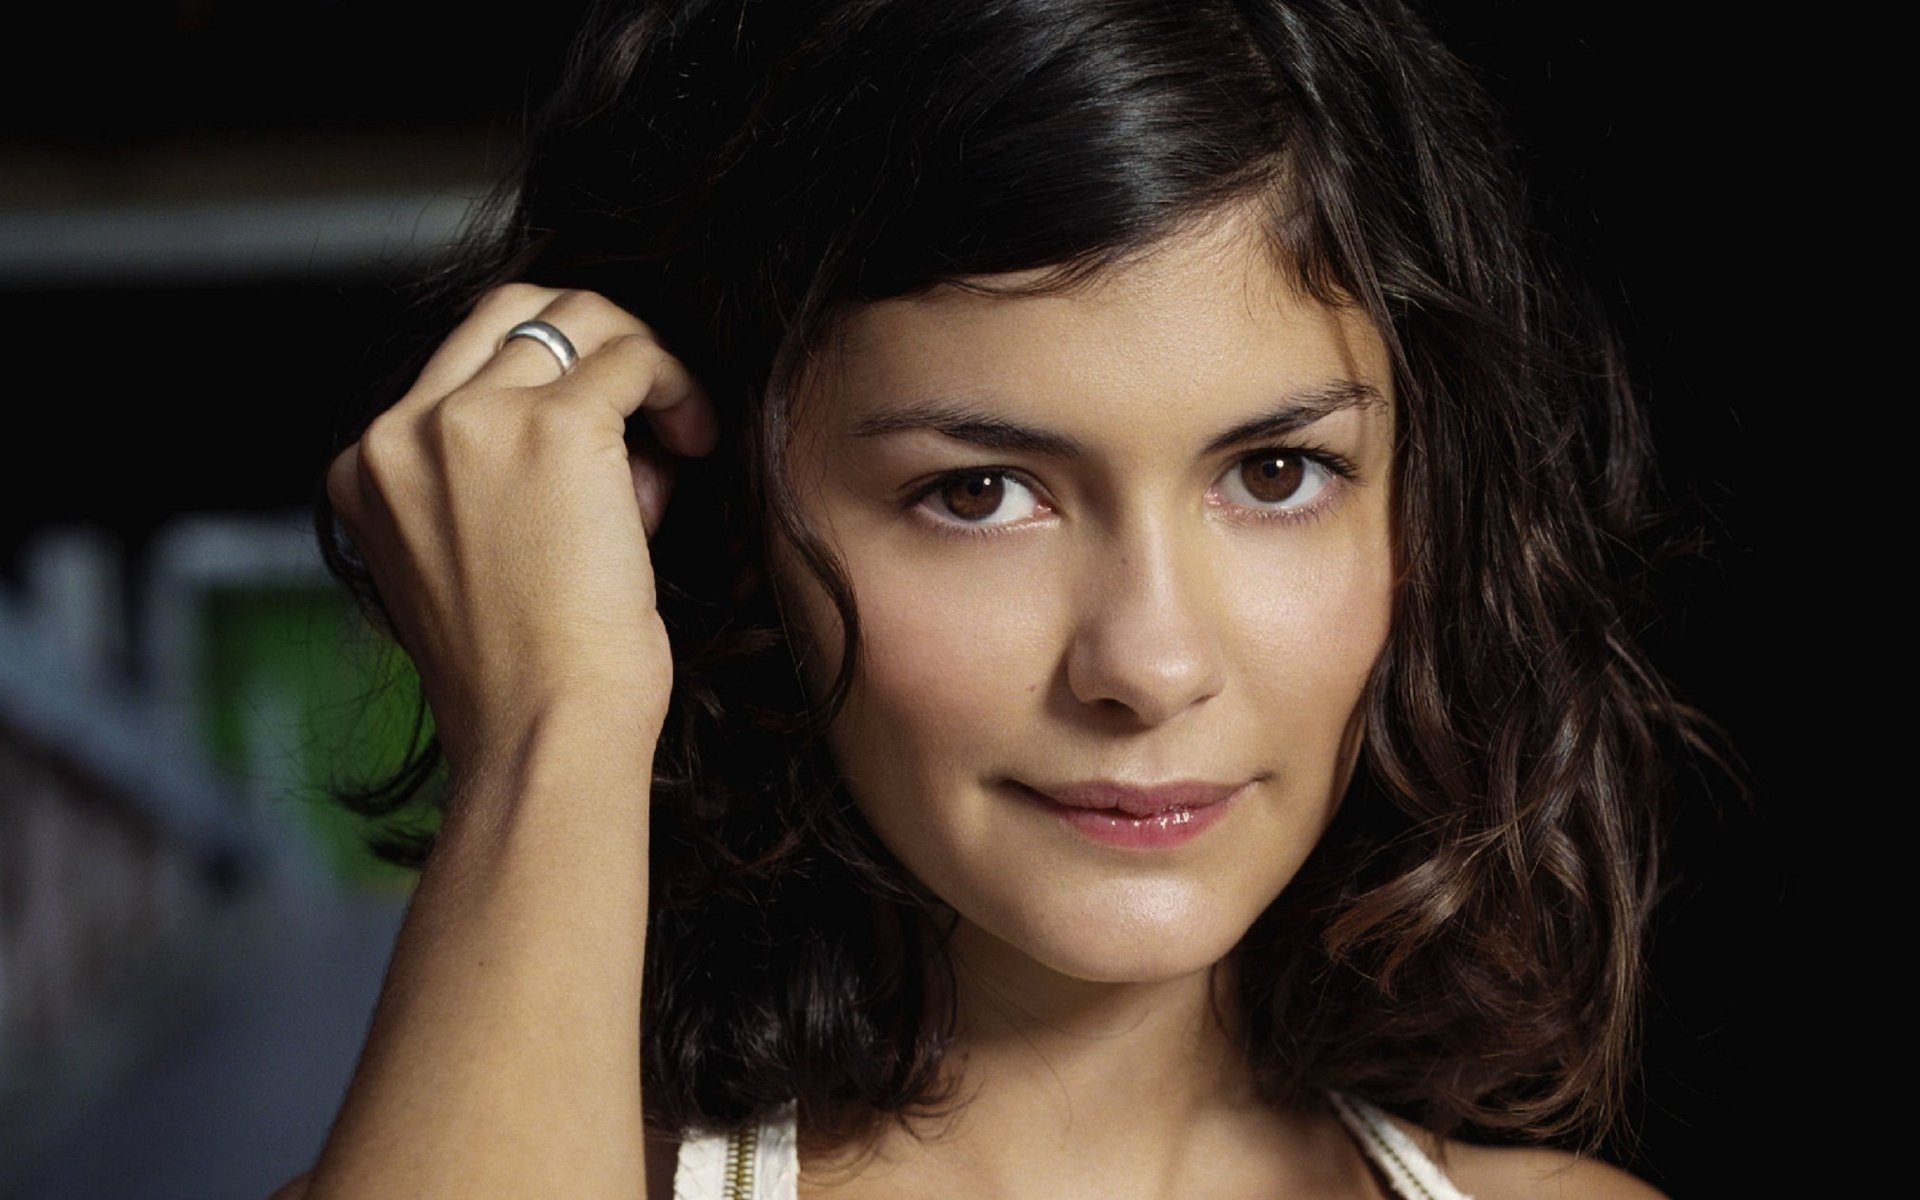 Audrey Tautou: Audience Award For Best Actress Nominee, 2001. 1920x1200 HD Background.